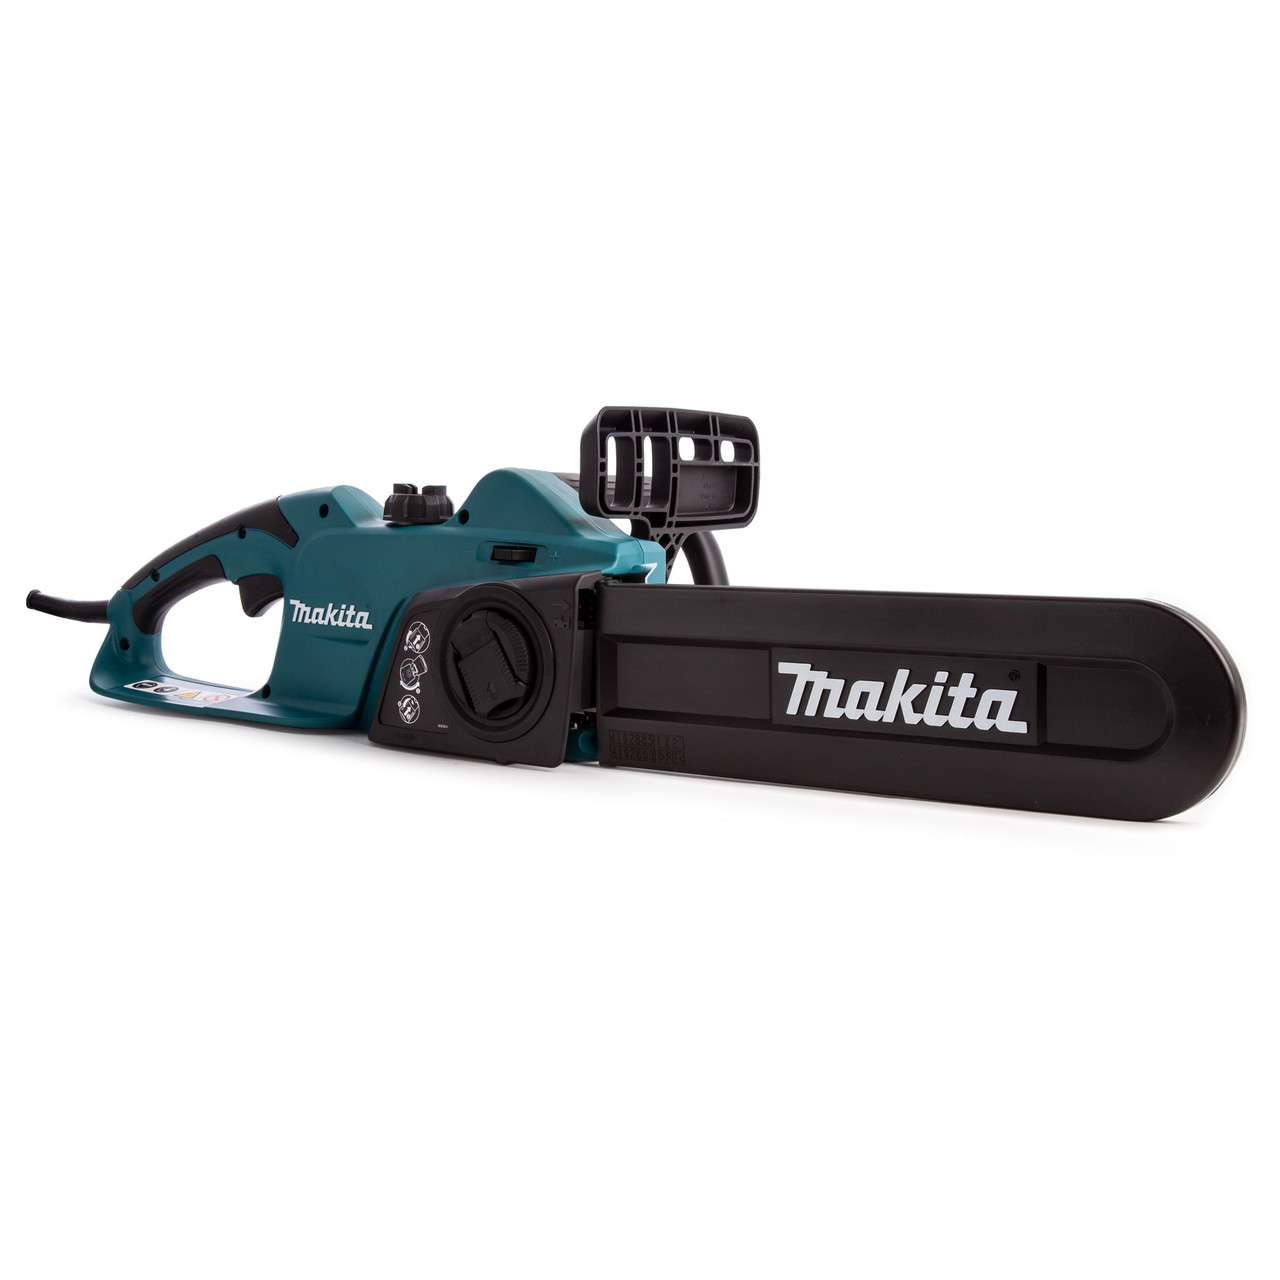 Makita uc3541a. Makita uc4041a. Makita uc4041a кейс. Makita Electric Chainsaw.